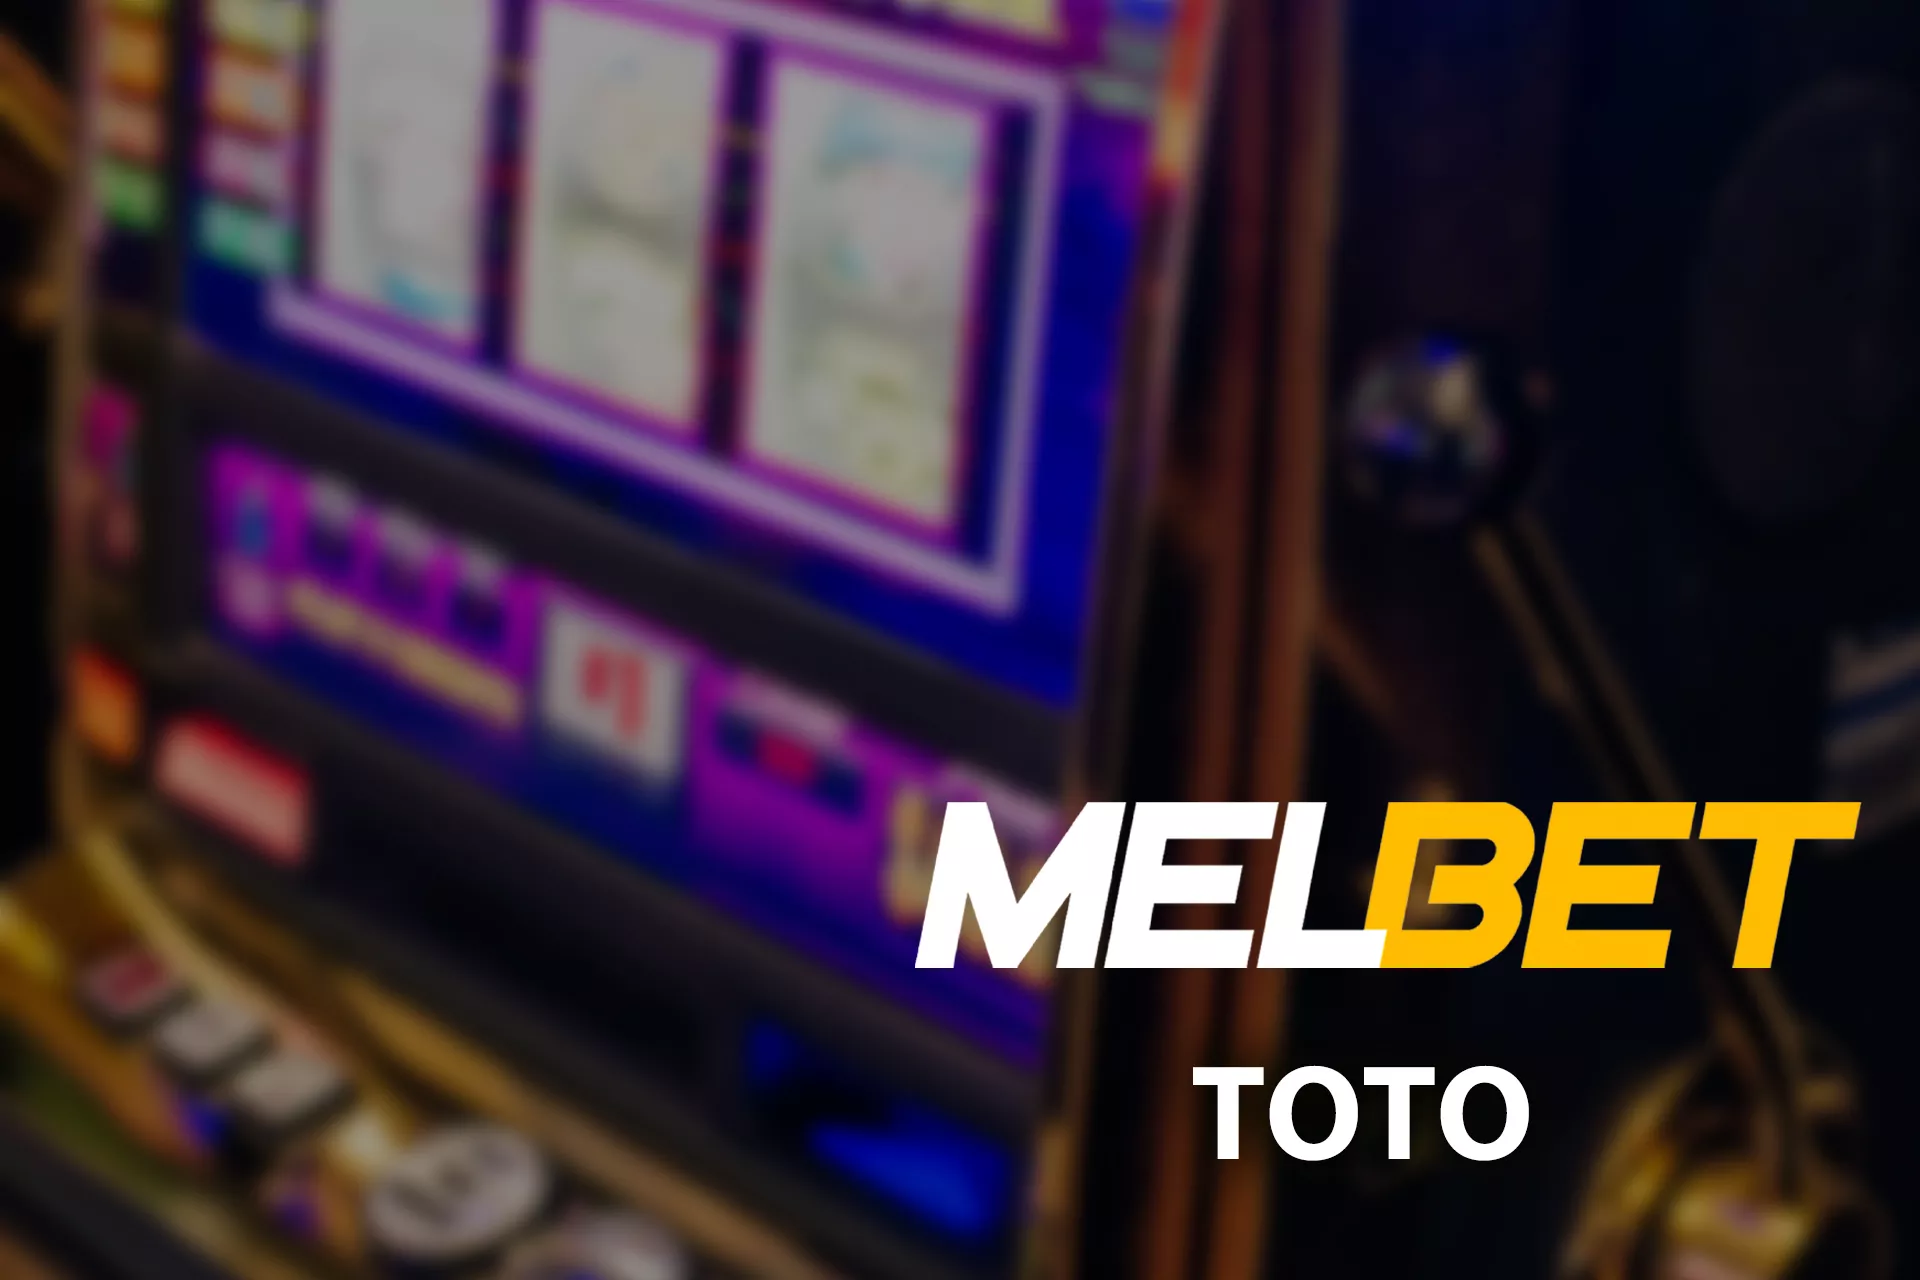 In the Melbet Toto, each user has a chance to win a huge jackpot.